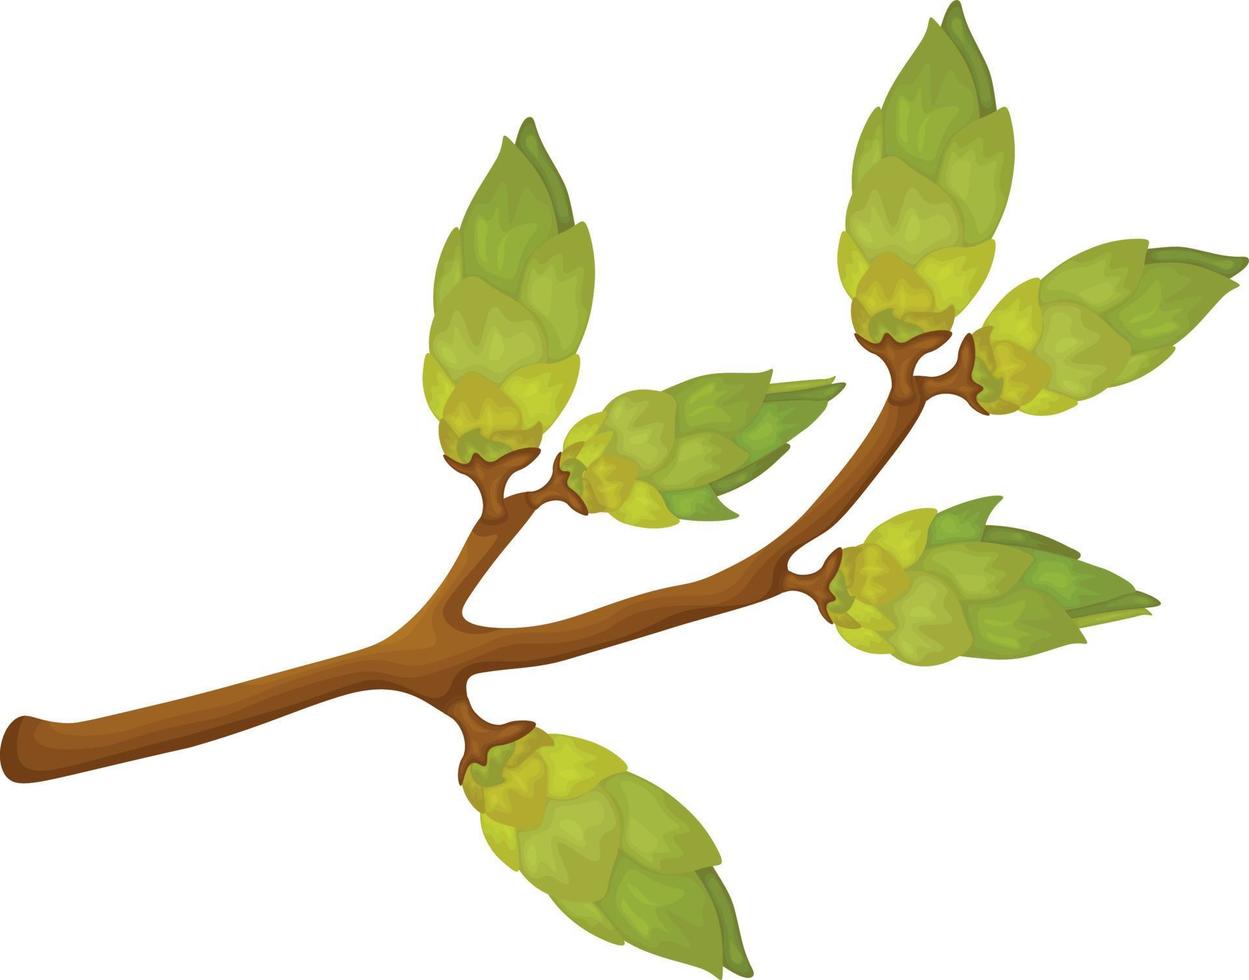 A branch with green buds. Spring illustration depicting a green tree branch with swollen buds. Vector illustration isolated on a white background